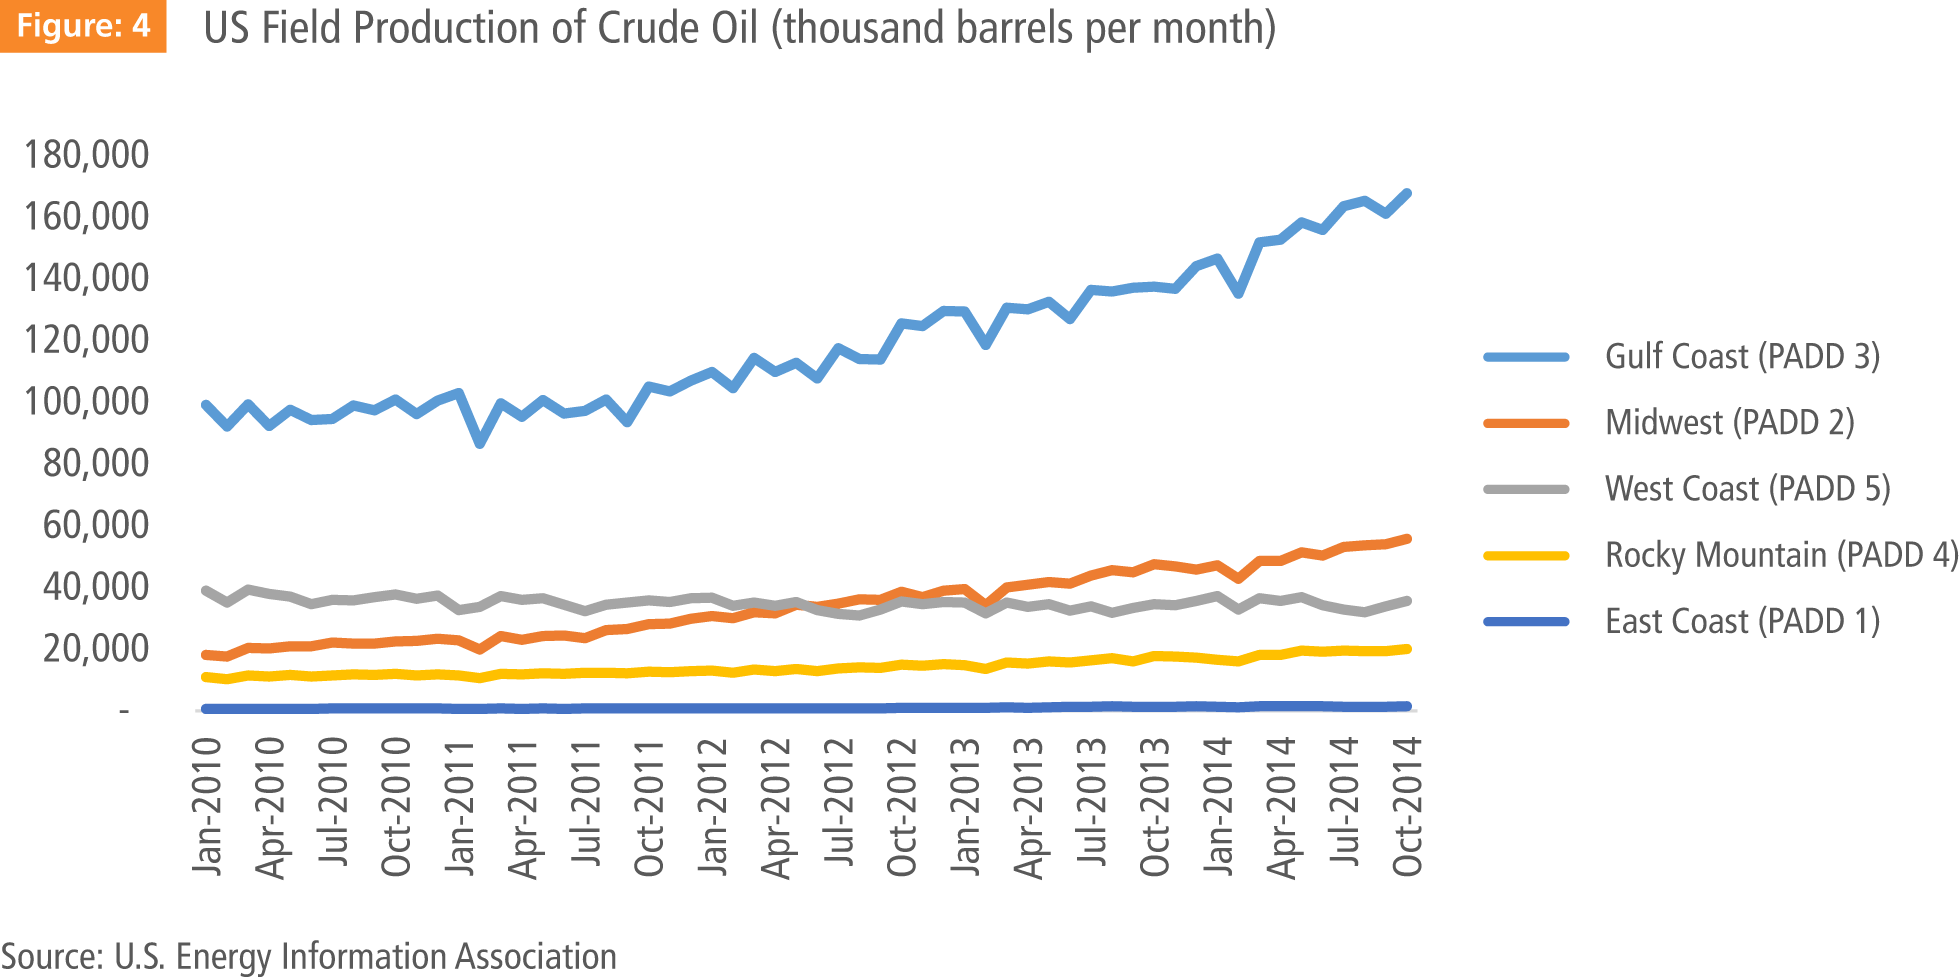 Crude Oil Field Production